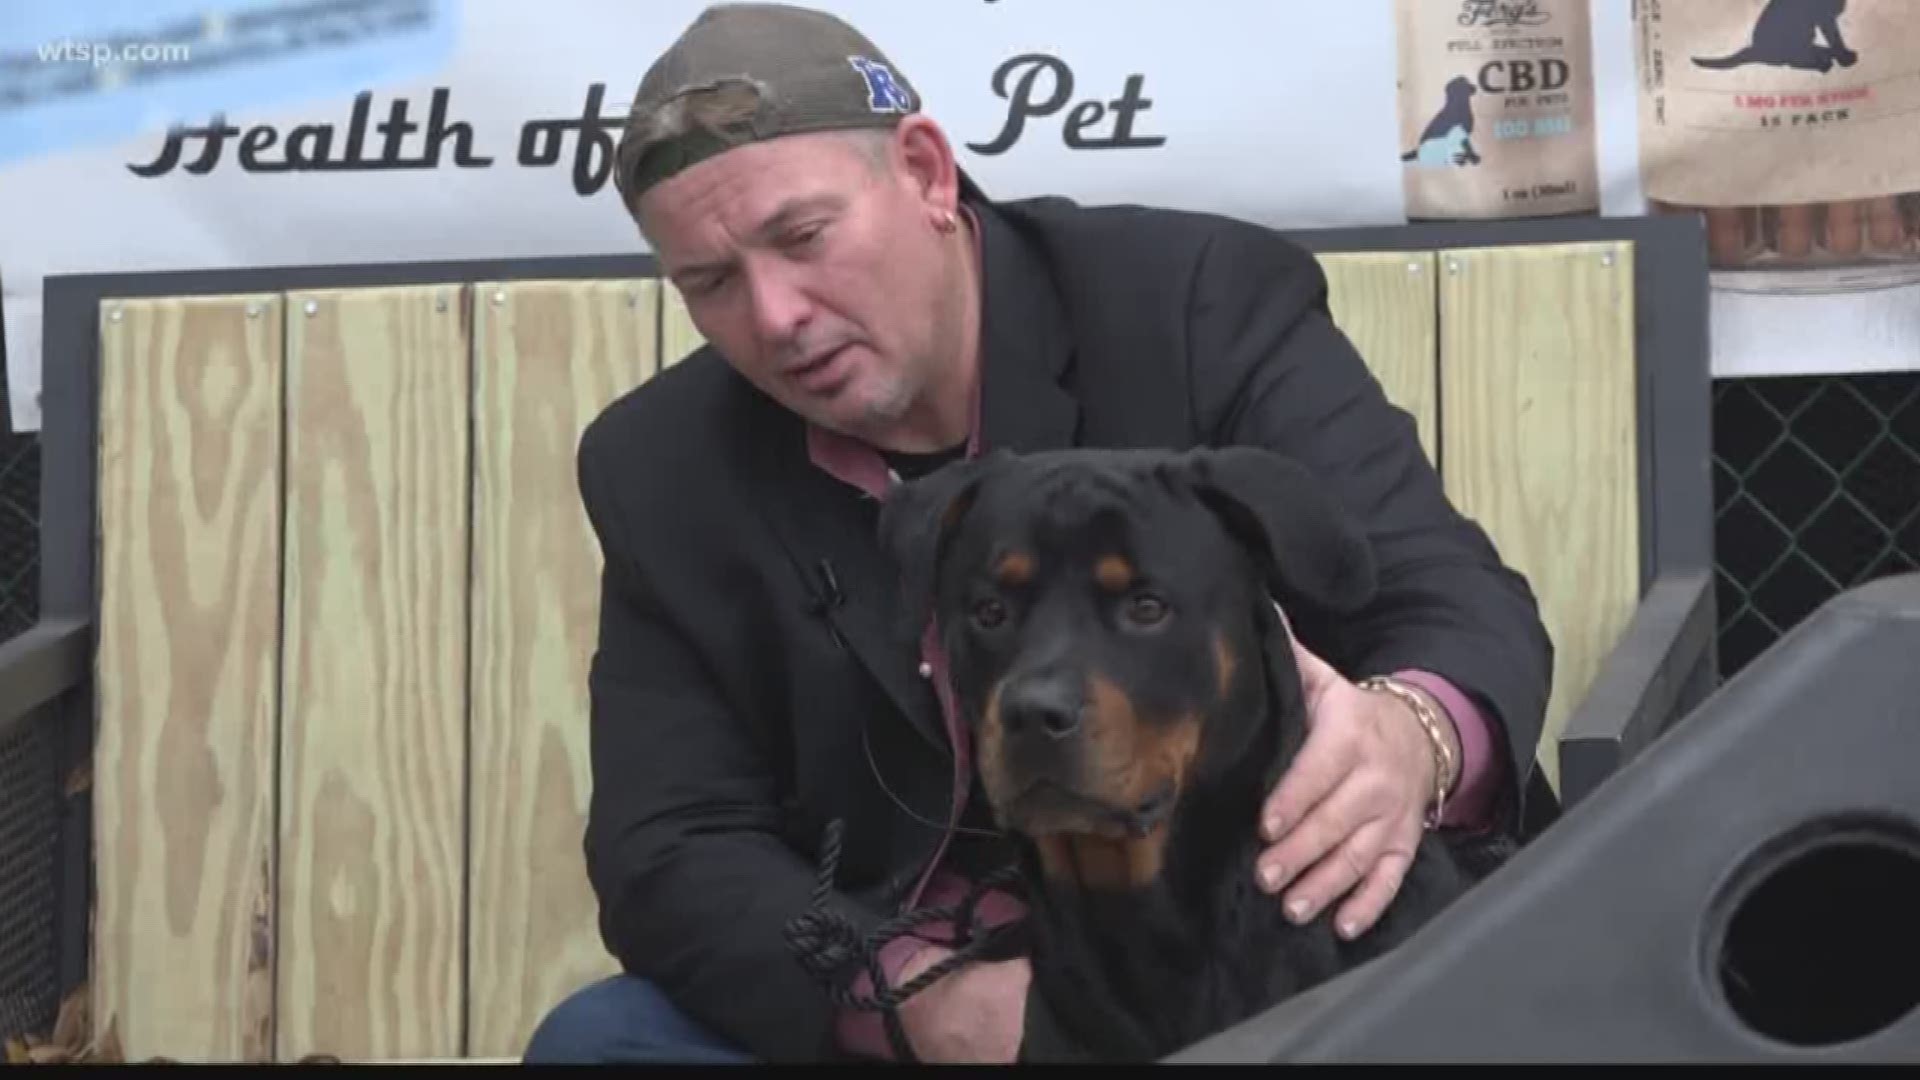 Mahi, a 1-year-old Rottweiler, and his owner are back together after the pup went missing for nearly three months.